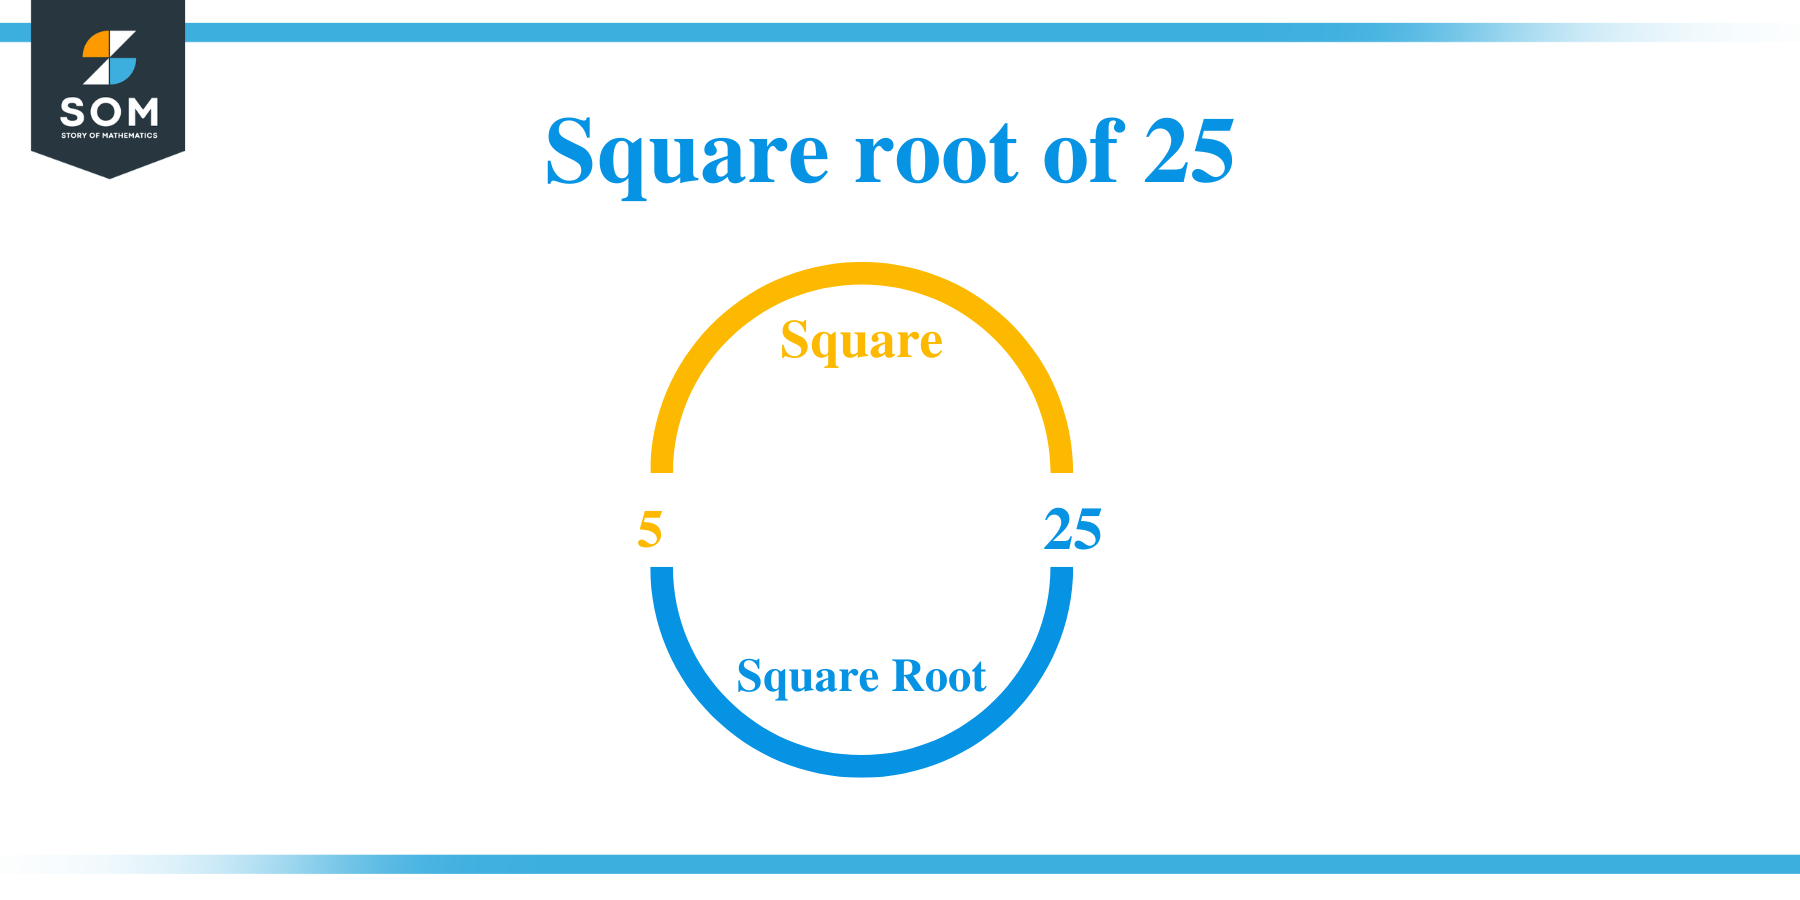 Square root of 25 1